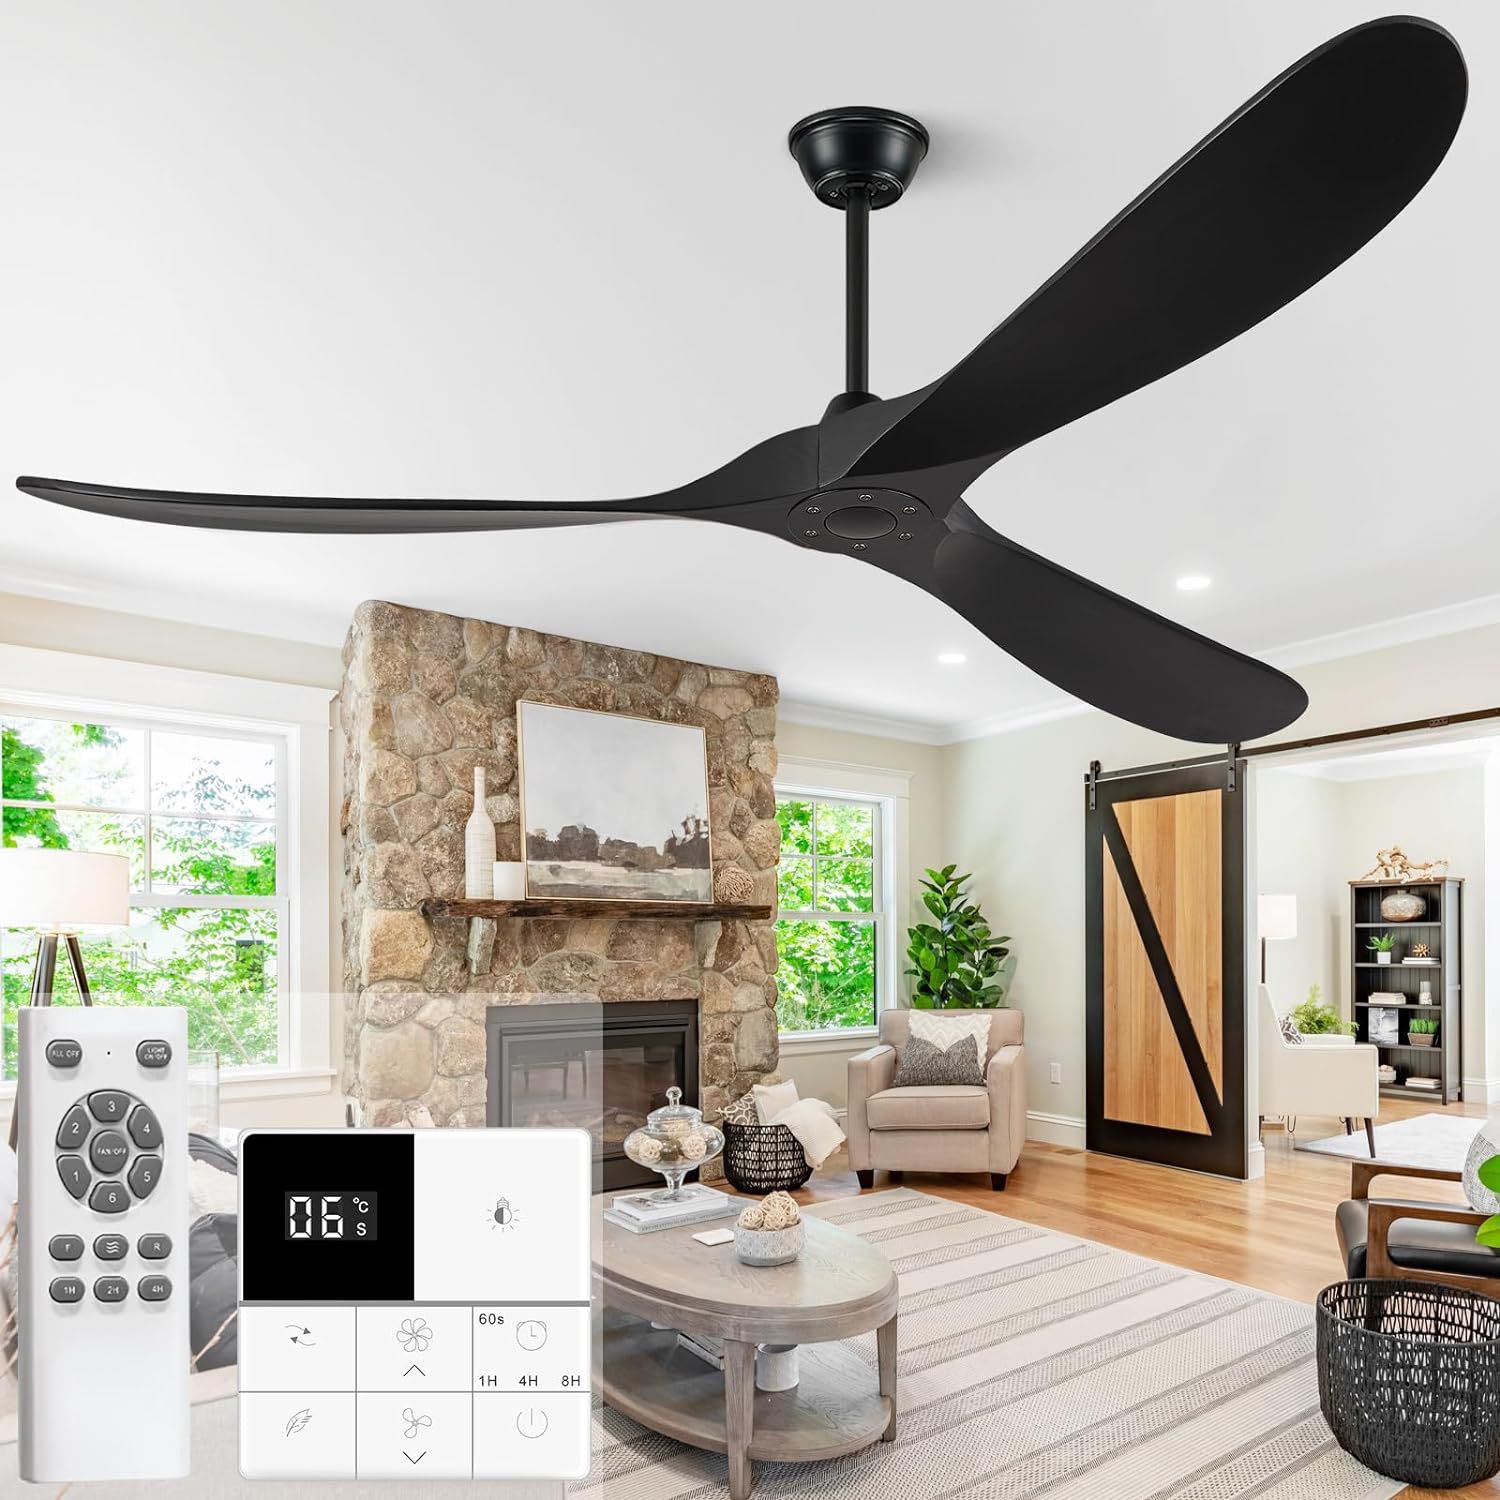 Eliora 72 Inch Ceiling Fan With Remote And Wall Switch,Large Wood Ceiling Fan Without Light 3 Blades, Outdoor Ceiling Fans 6 Speed, Quiet DC Motor for